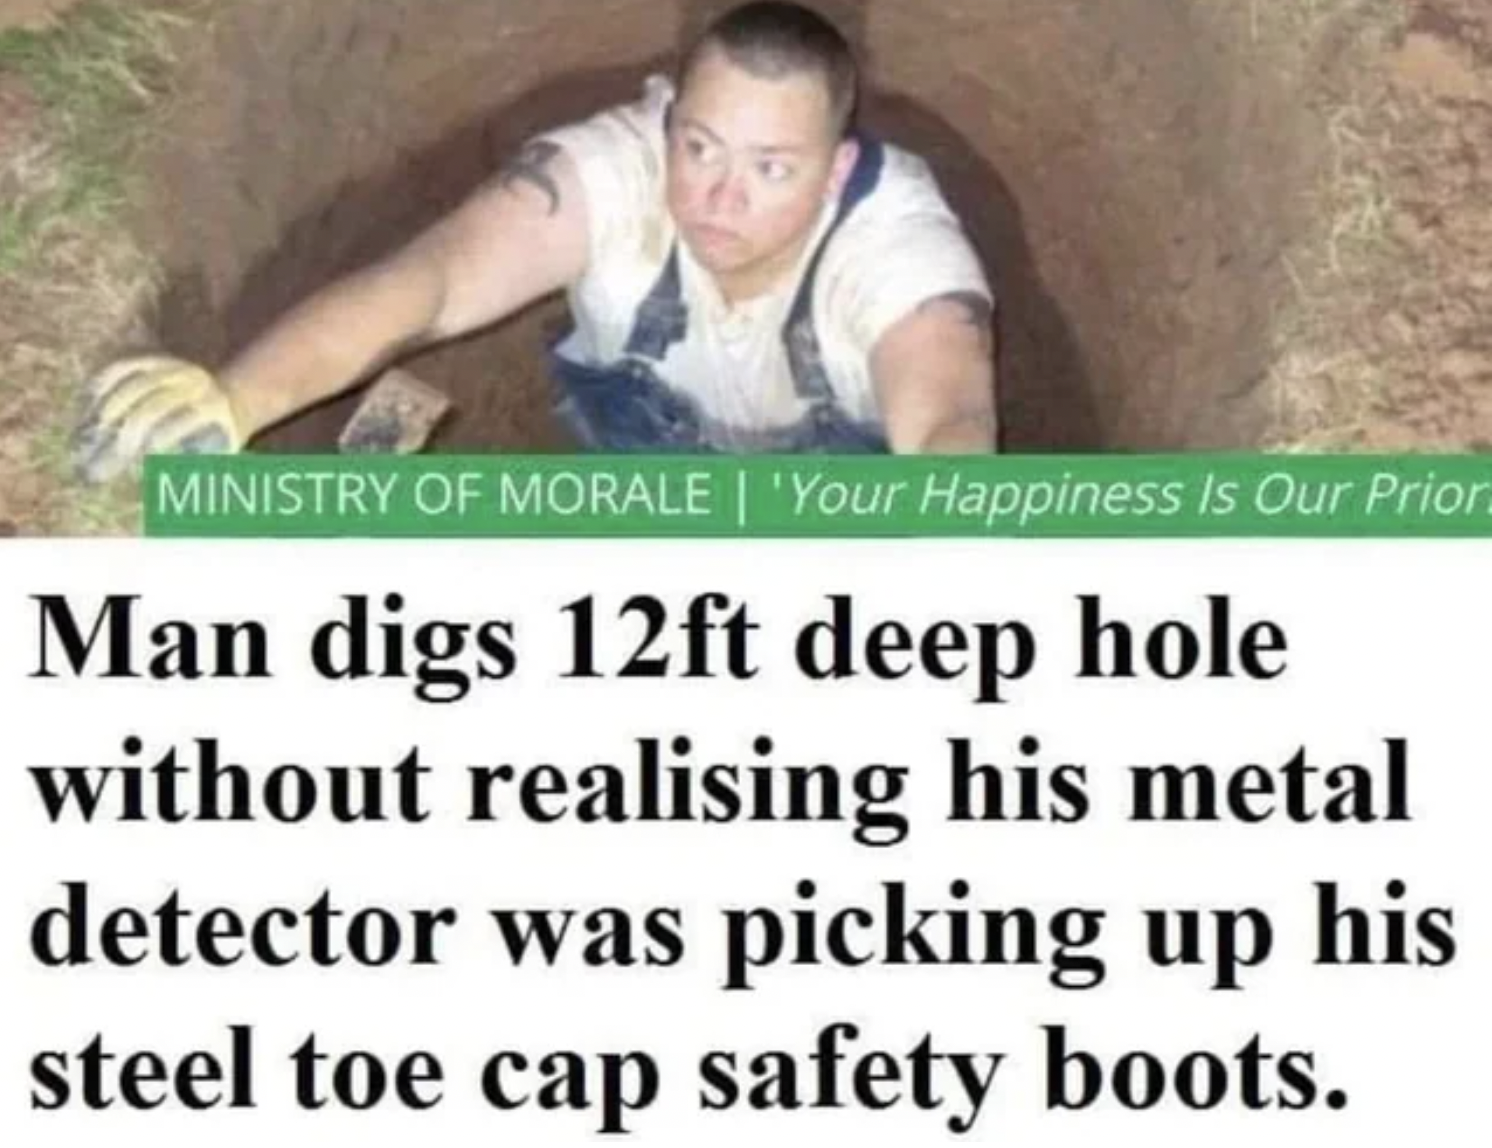 muskegon community college - Ministry Of Morale | 'Your Happiness Is Our Prior Man digs 12ft deep hole without realising his metal detector was picking up his steel toe cap safety boots.